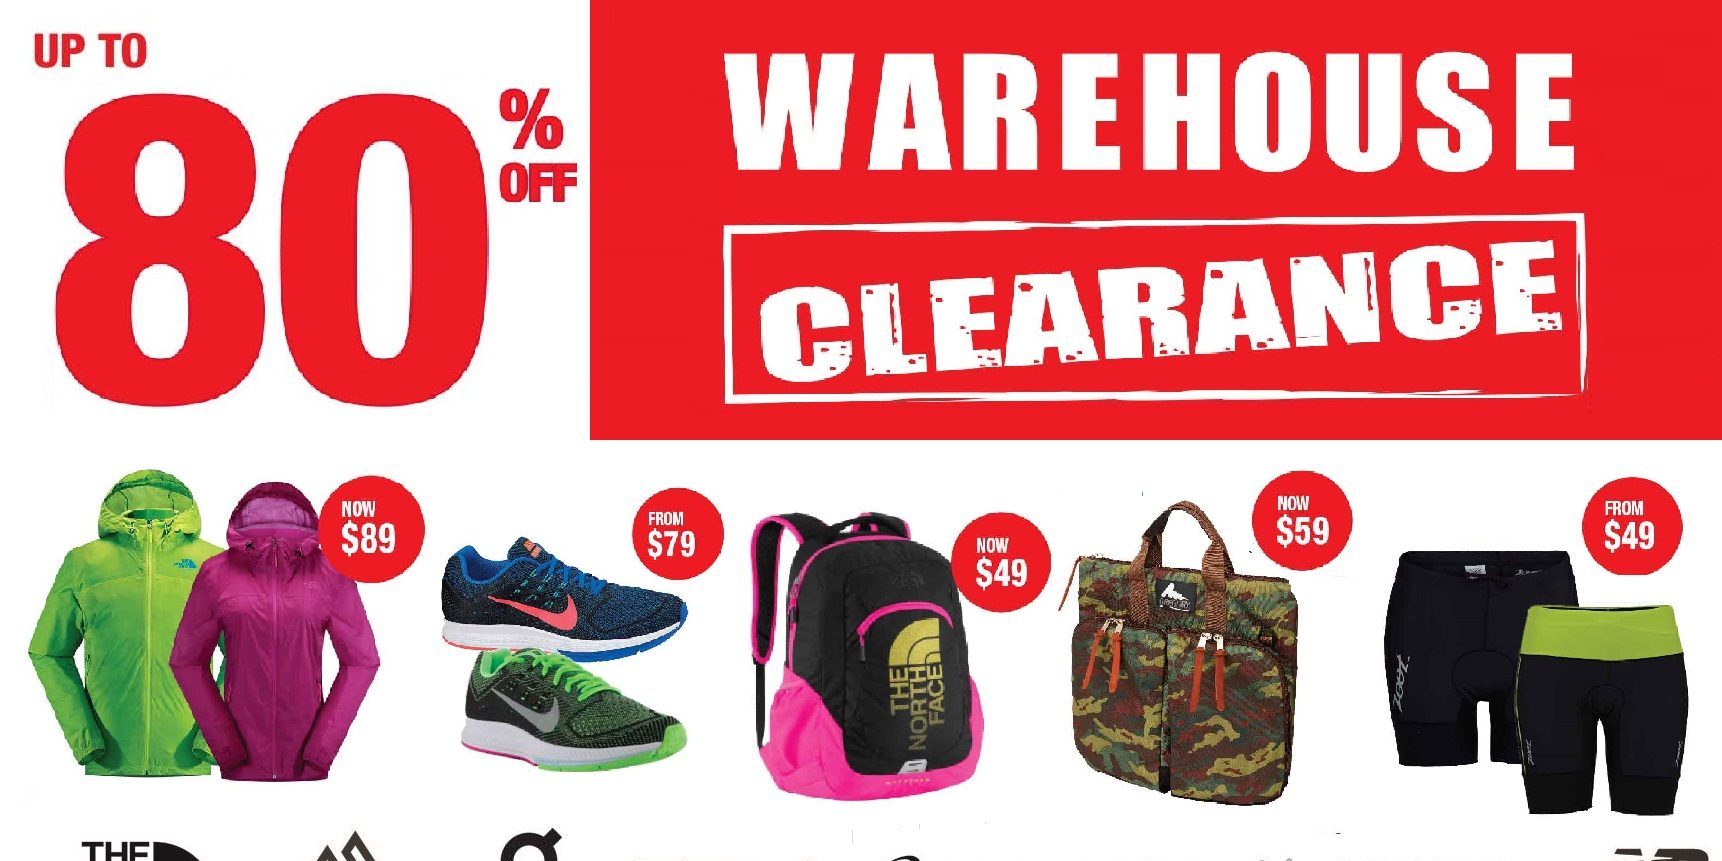 Outdoor Venture Singapore Up to 80% Off Winter & Hiking Gears Promotion 4-6 Nov 2016